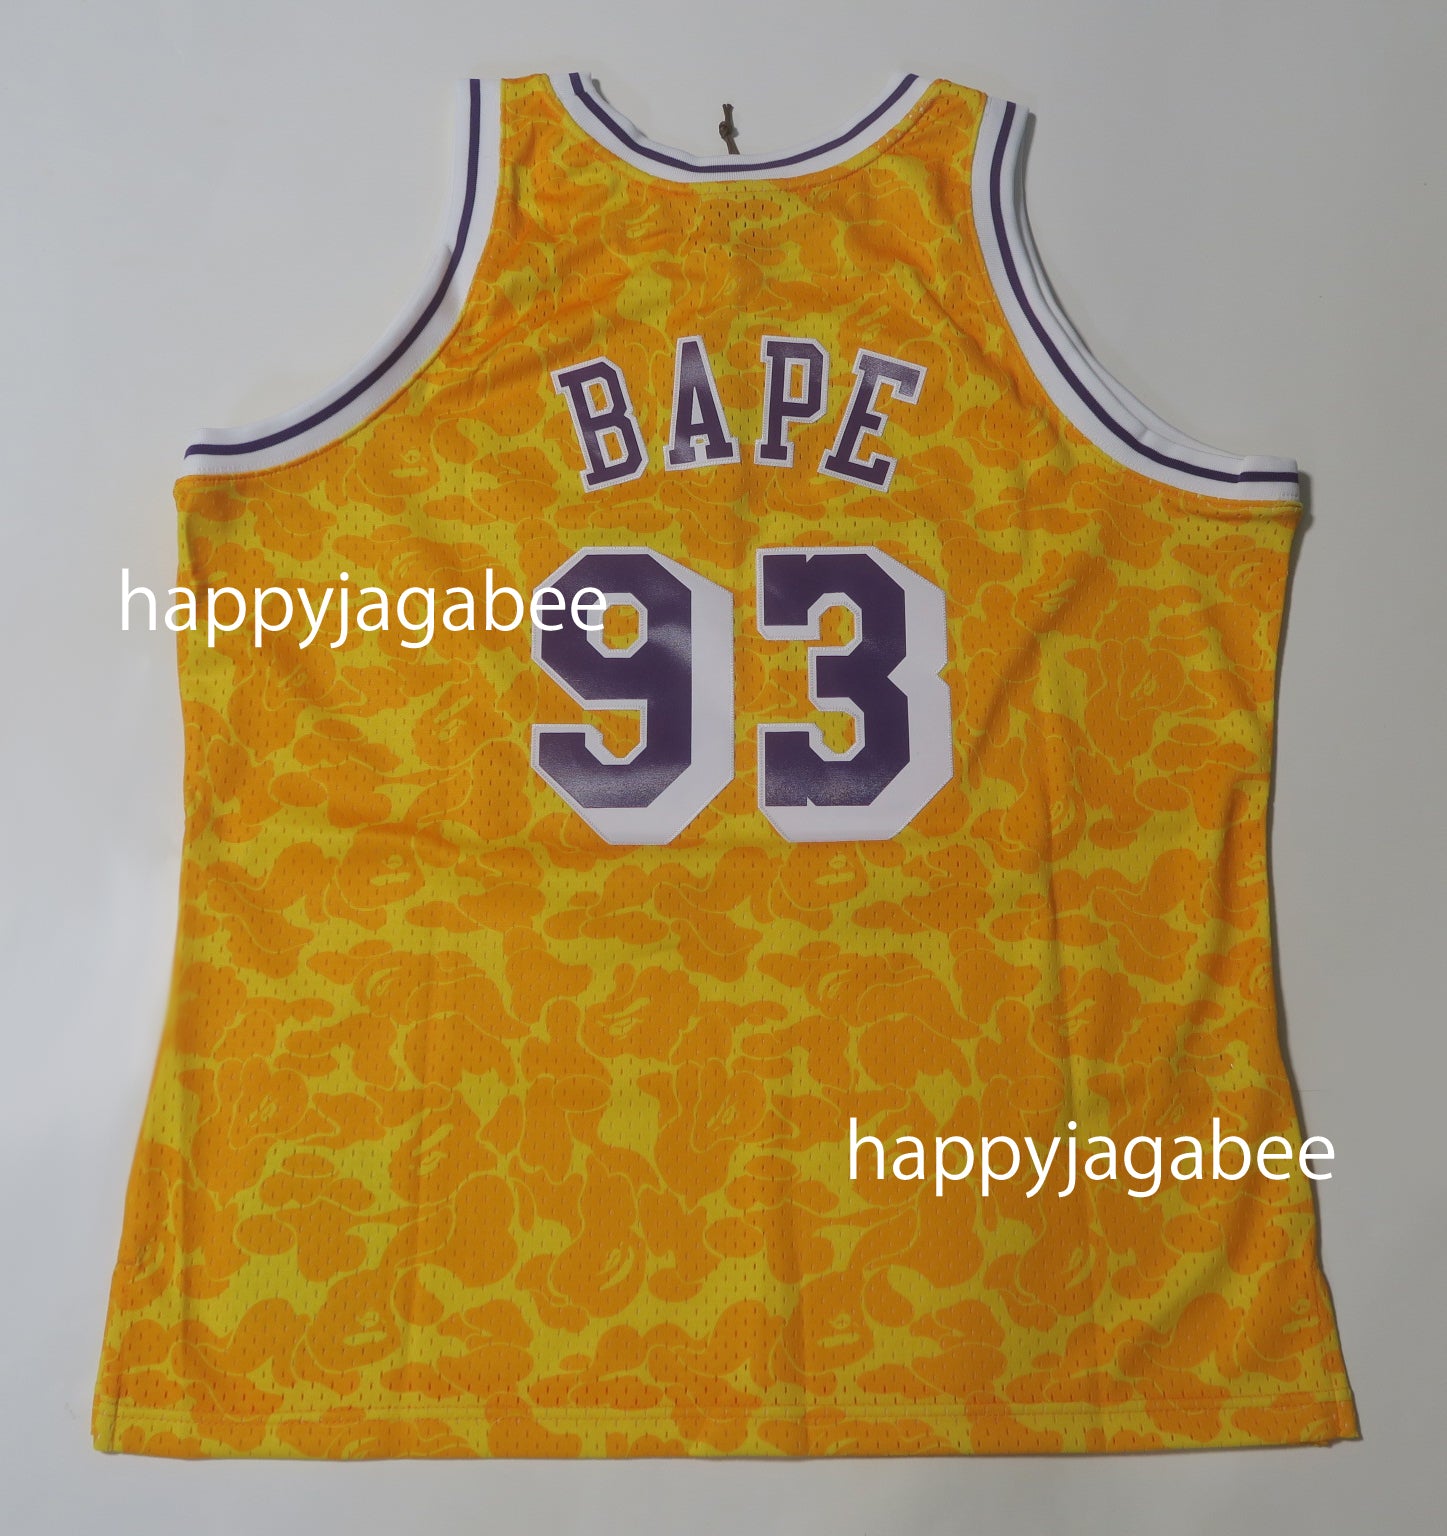 A BATHING APE BAPE x M&N Mitchell & Ness LOS ANGELES LAKERS JERSEY